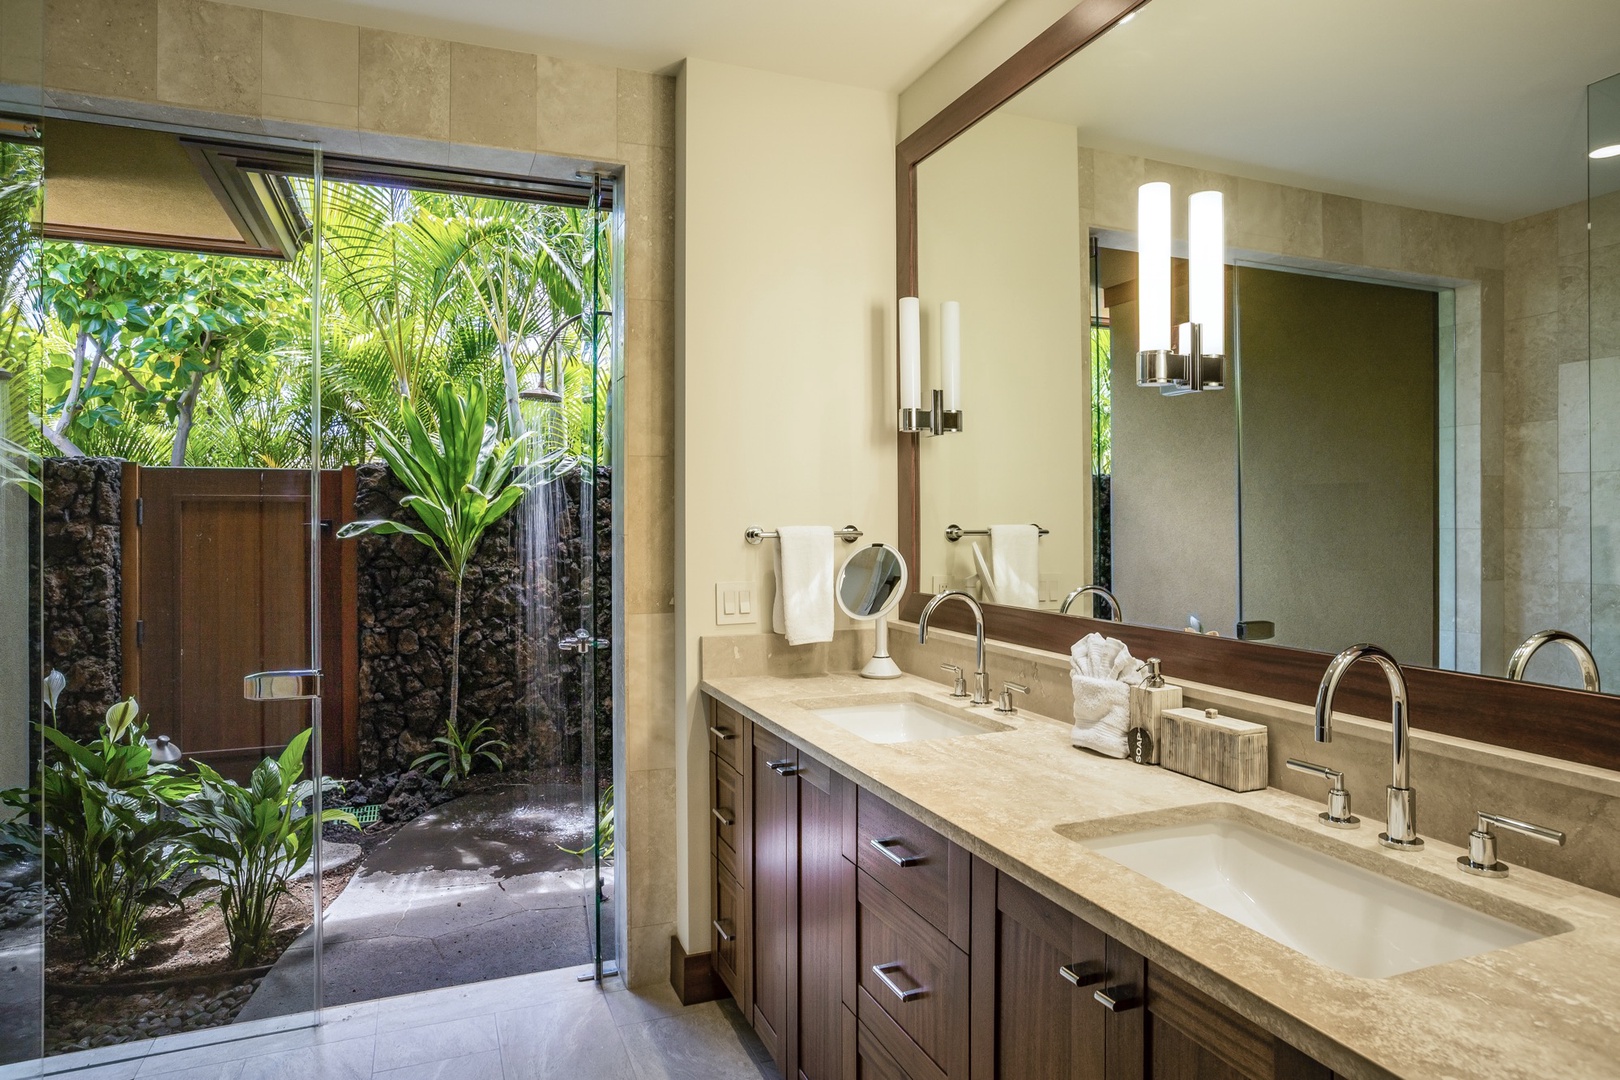 Kailua Kona Vacation Rentals, 4BD Kulanakauhale (3558) Estate Home at Four Seasons Resort at Hualalai - Guest bedroom two en-suite bath with dual vanities, walk-in shower and outdoor shower garden.